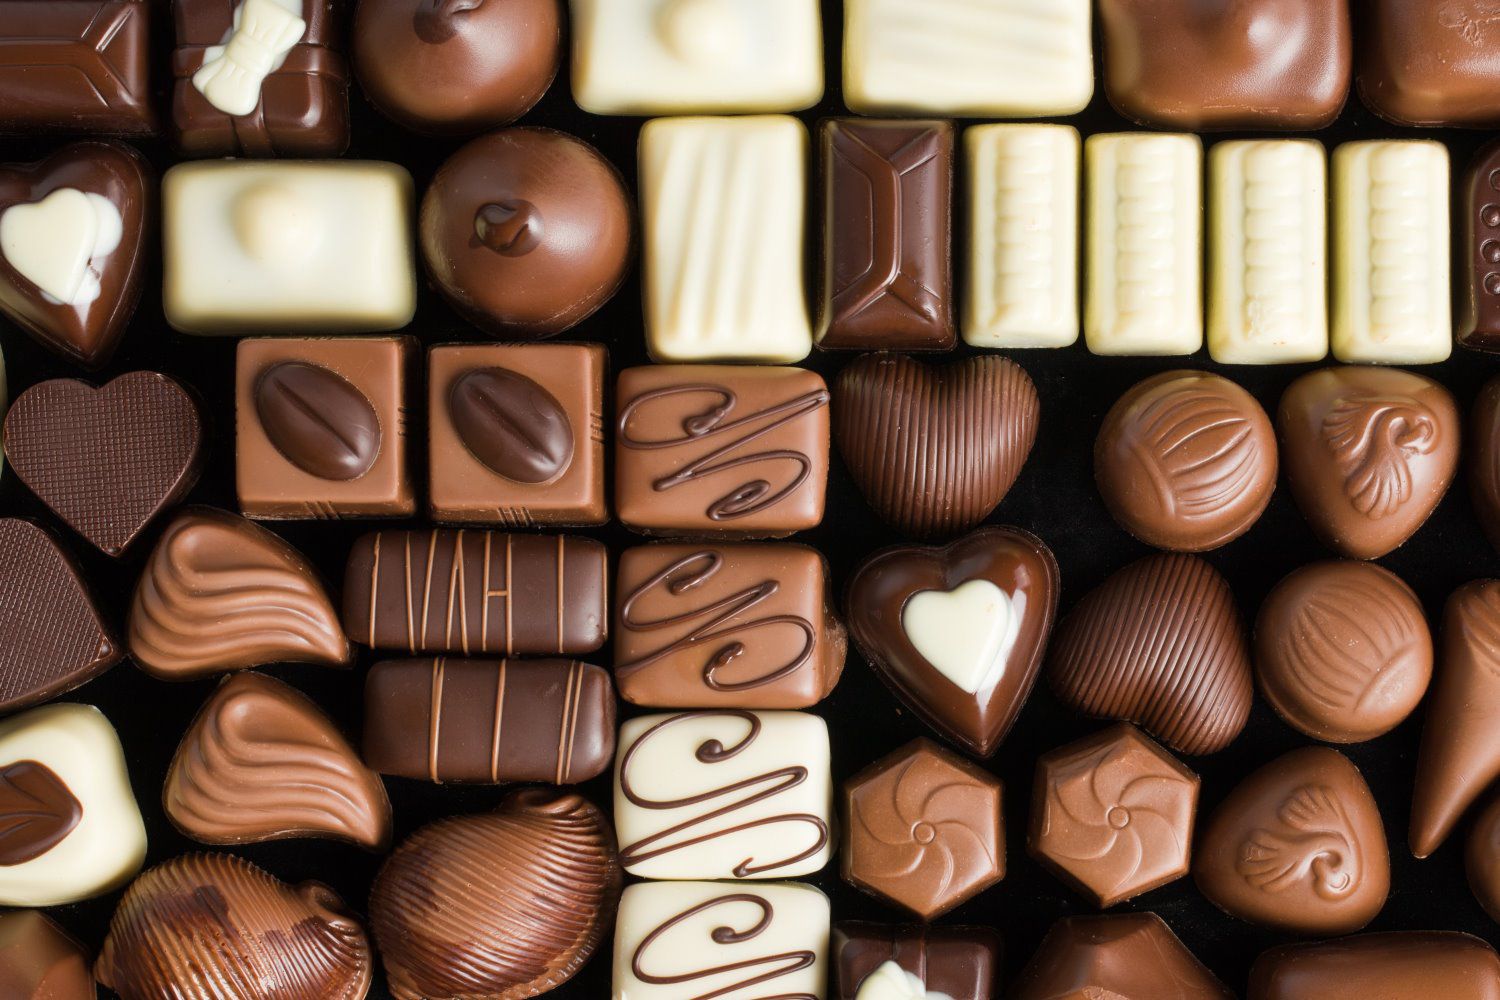 Chocolate Can Prevent Type 2 Diabetes